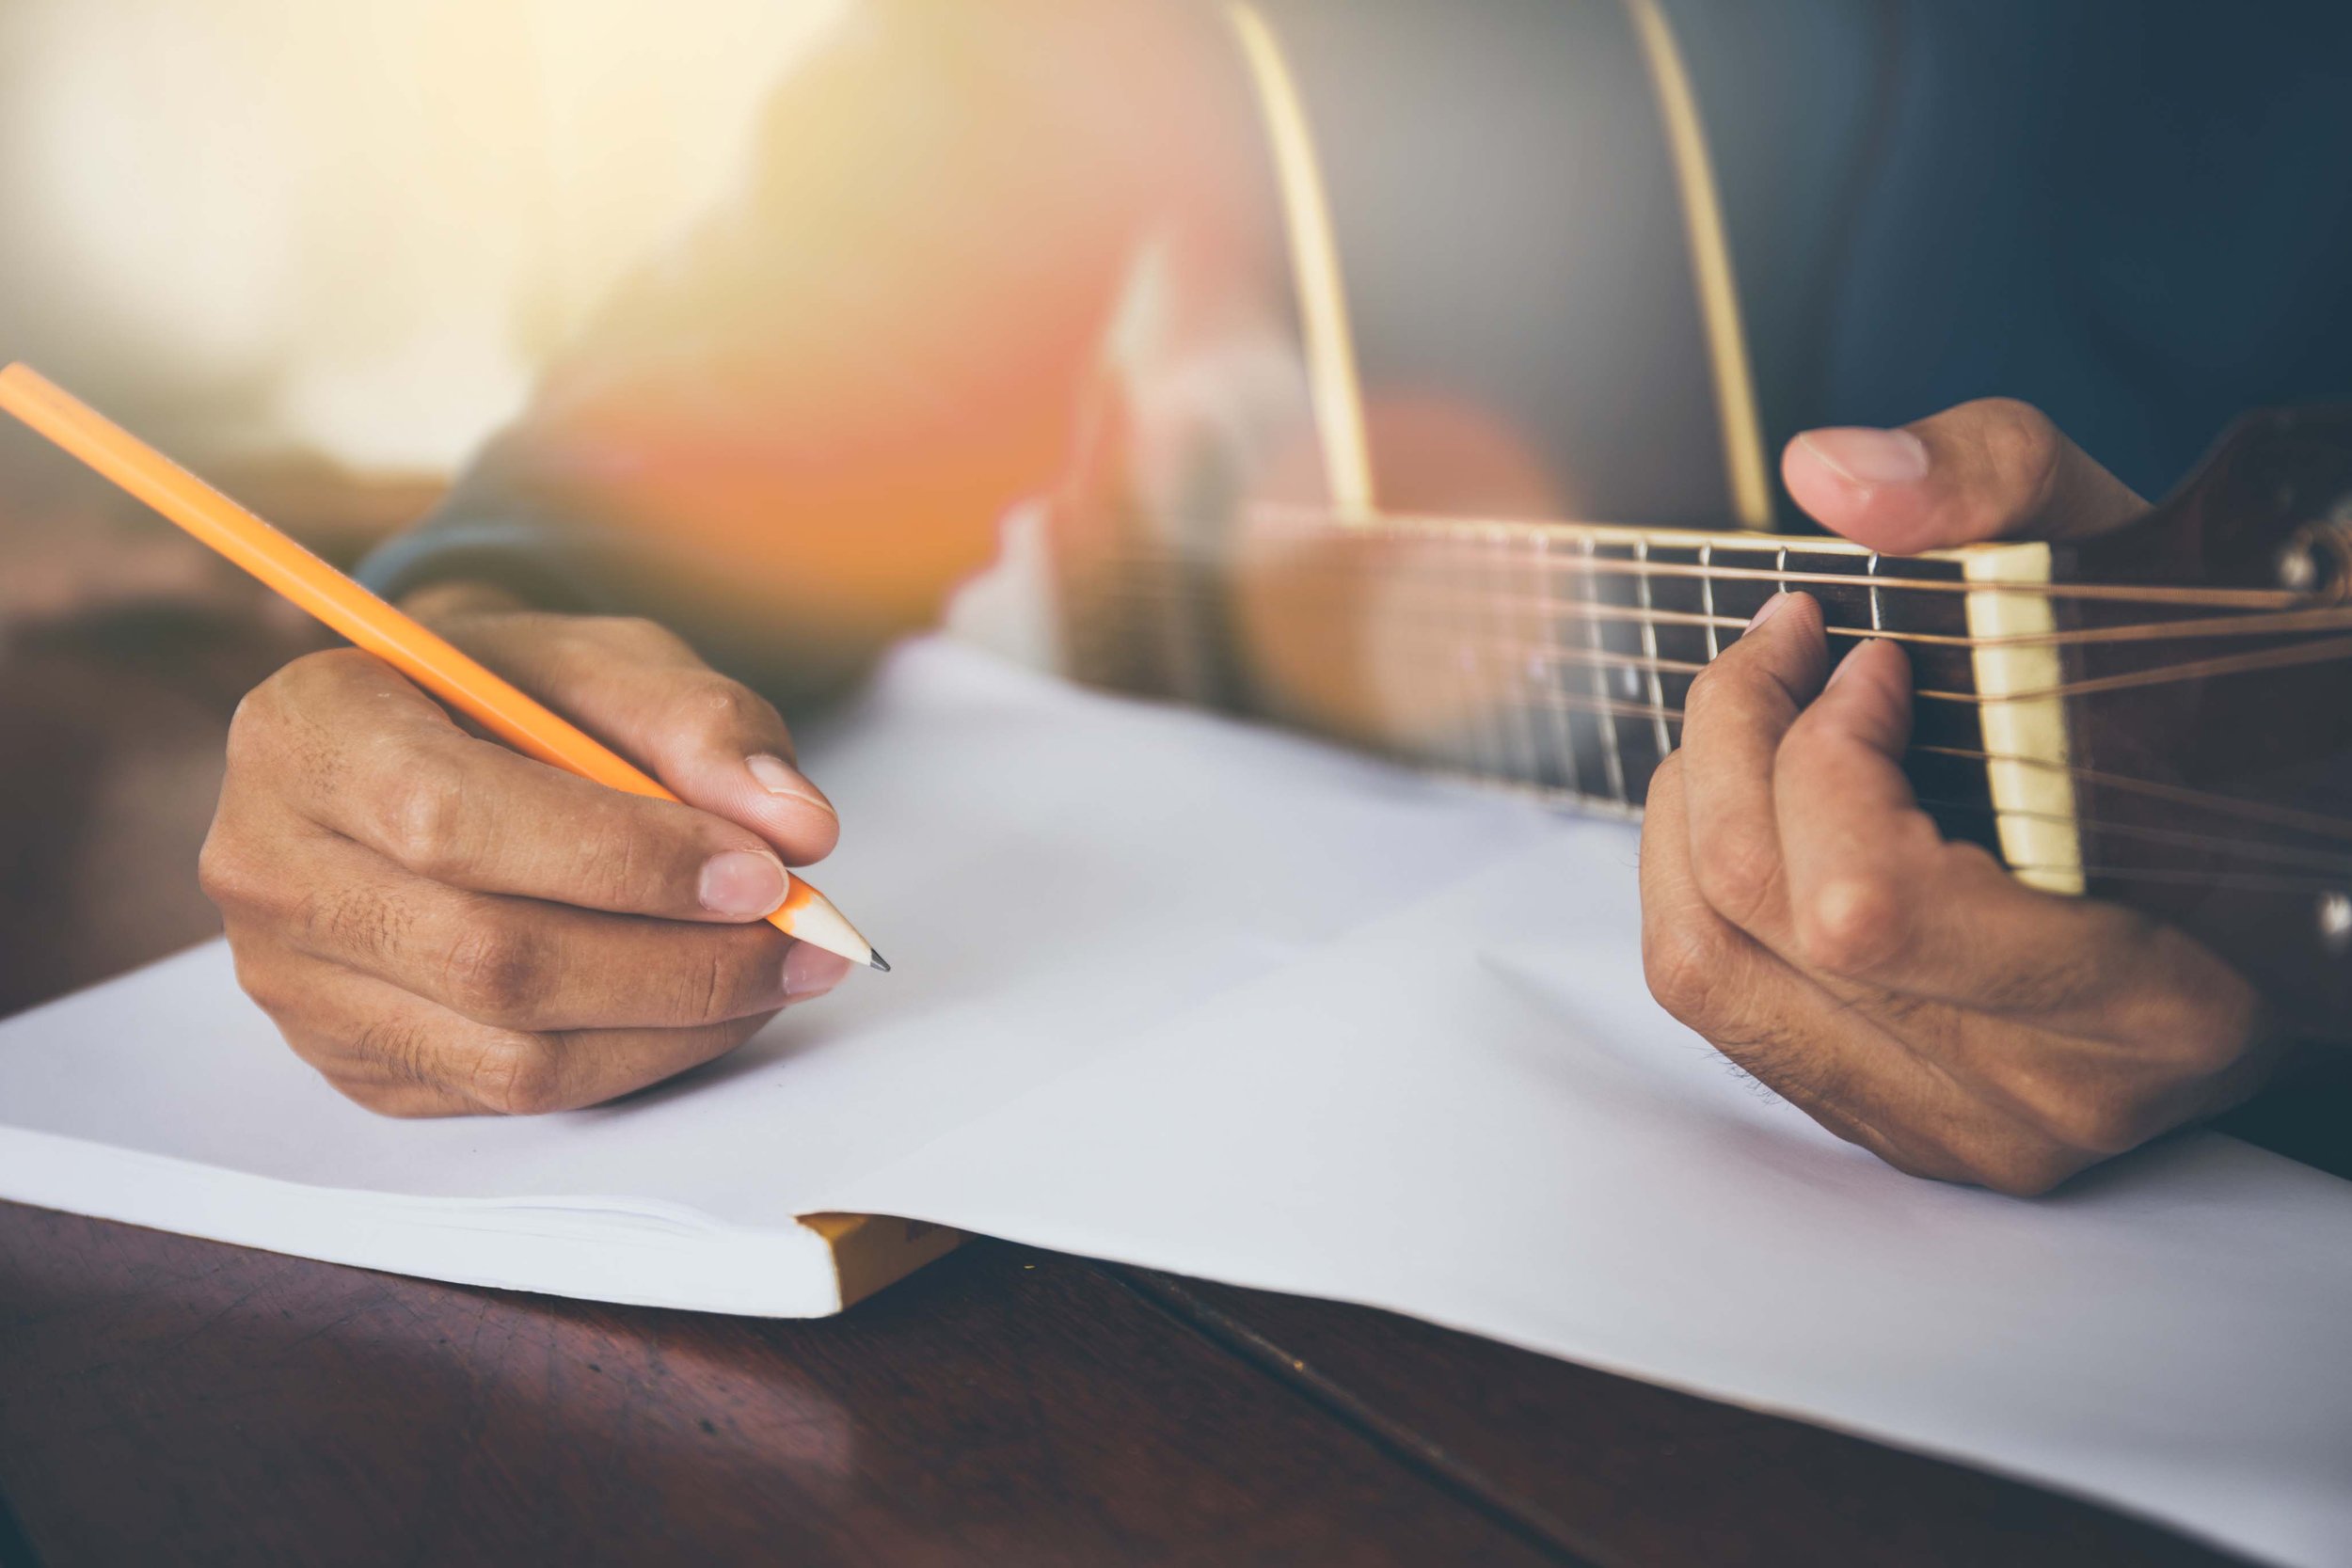 How To Get A Songwriter